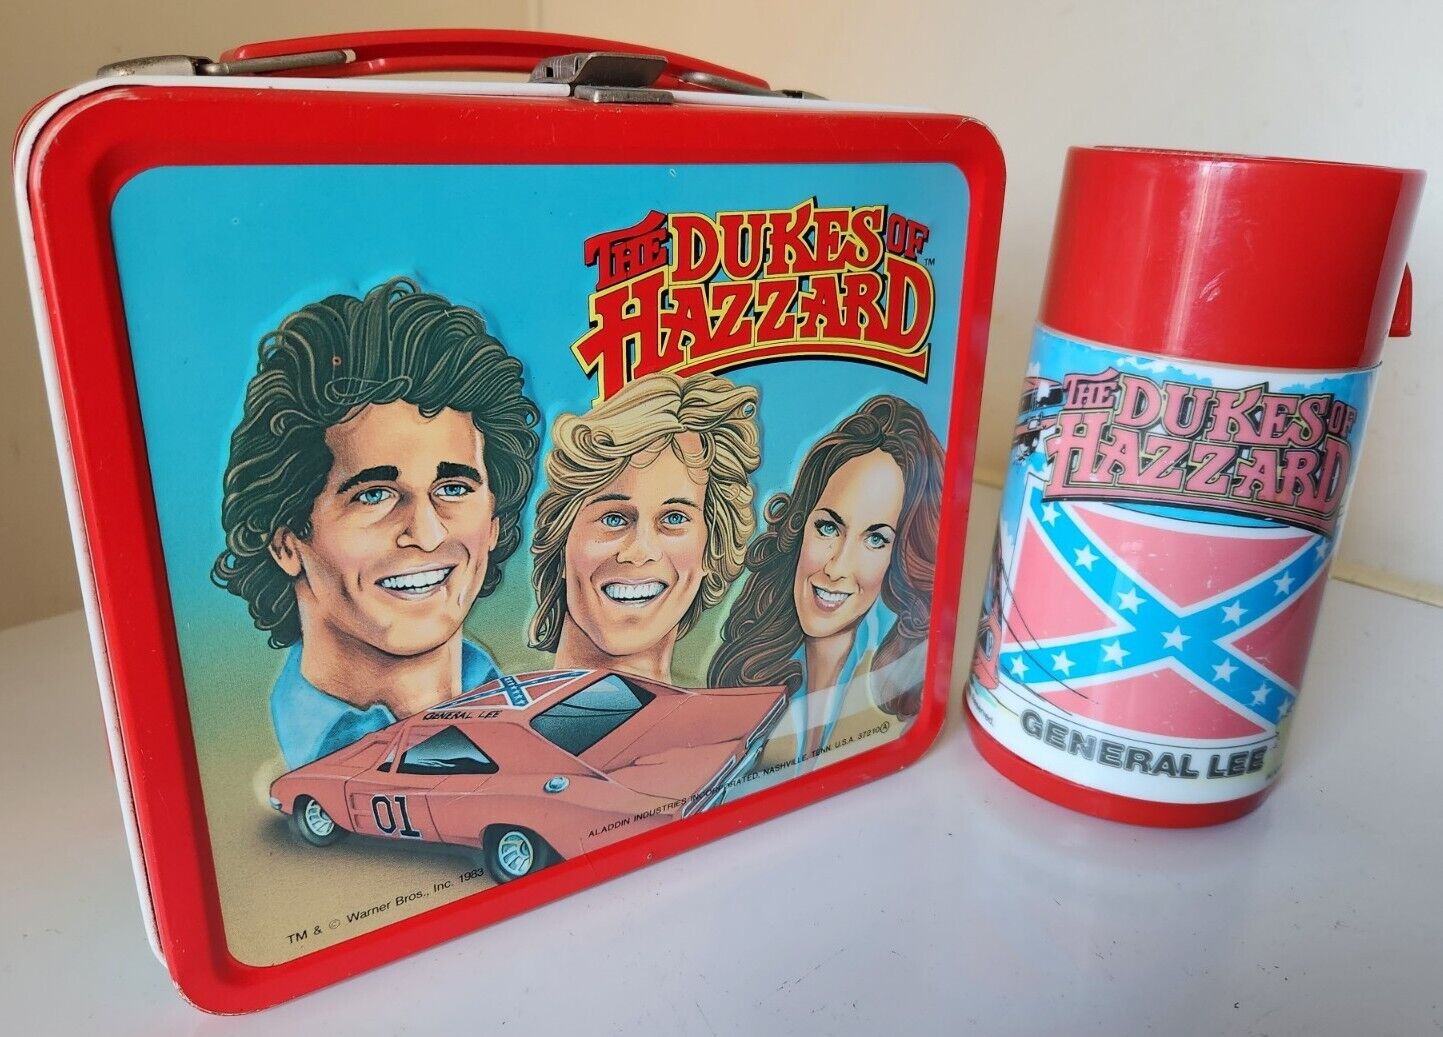 Vntg 1983 The Dukes of Hazzard Lunchbox w/ Thermos (Coy & Vance)  By Aladdin Inc